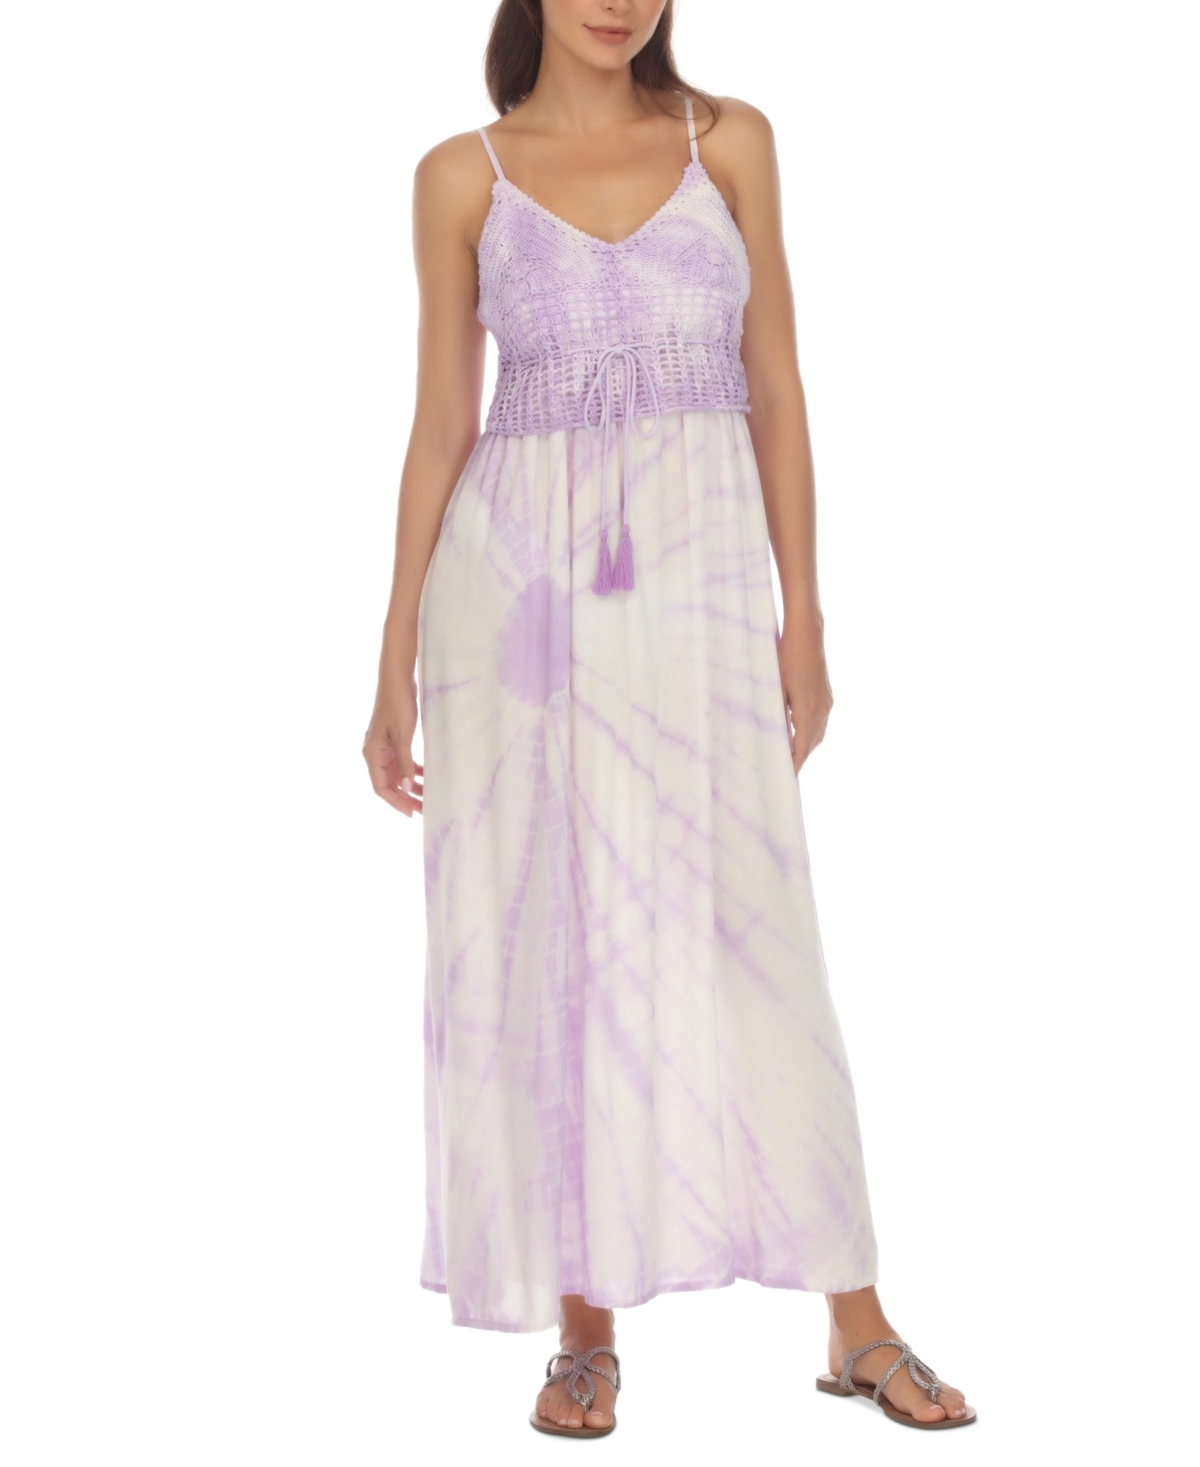 Women's Tie-Dyed Maxi Dress Cover-Up - Lavender Tie-Dye